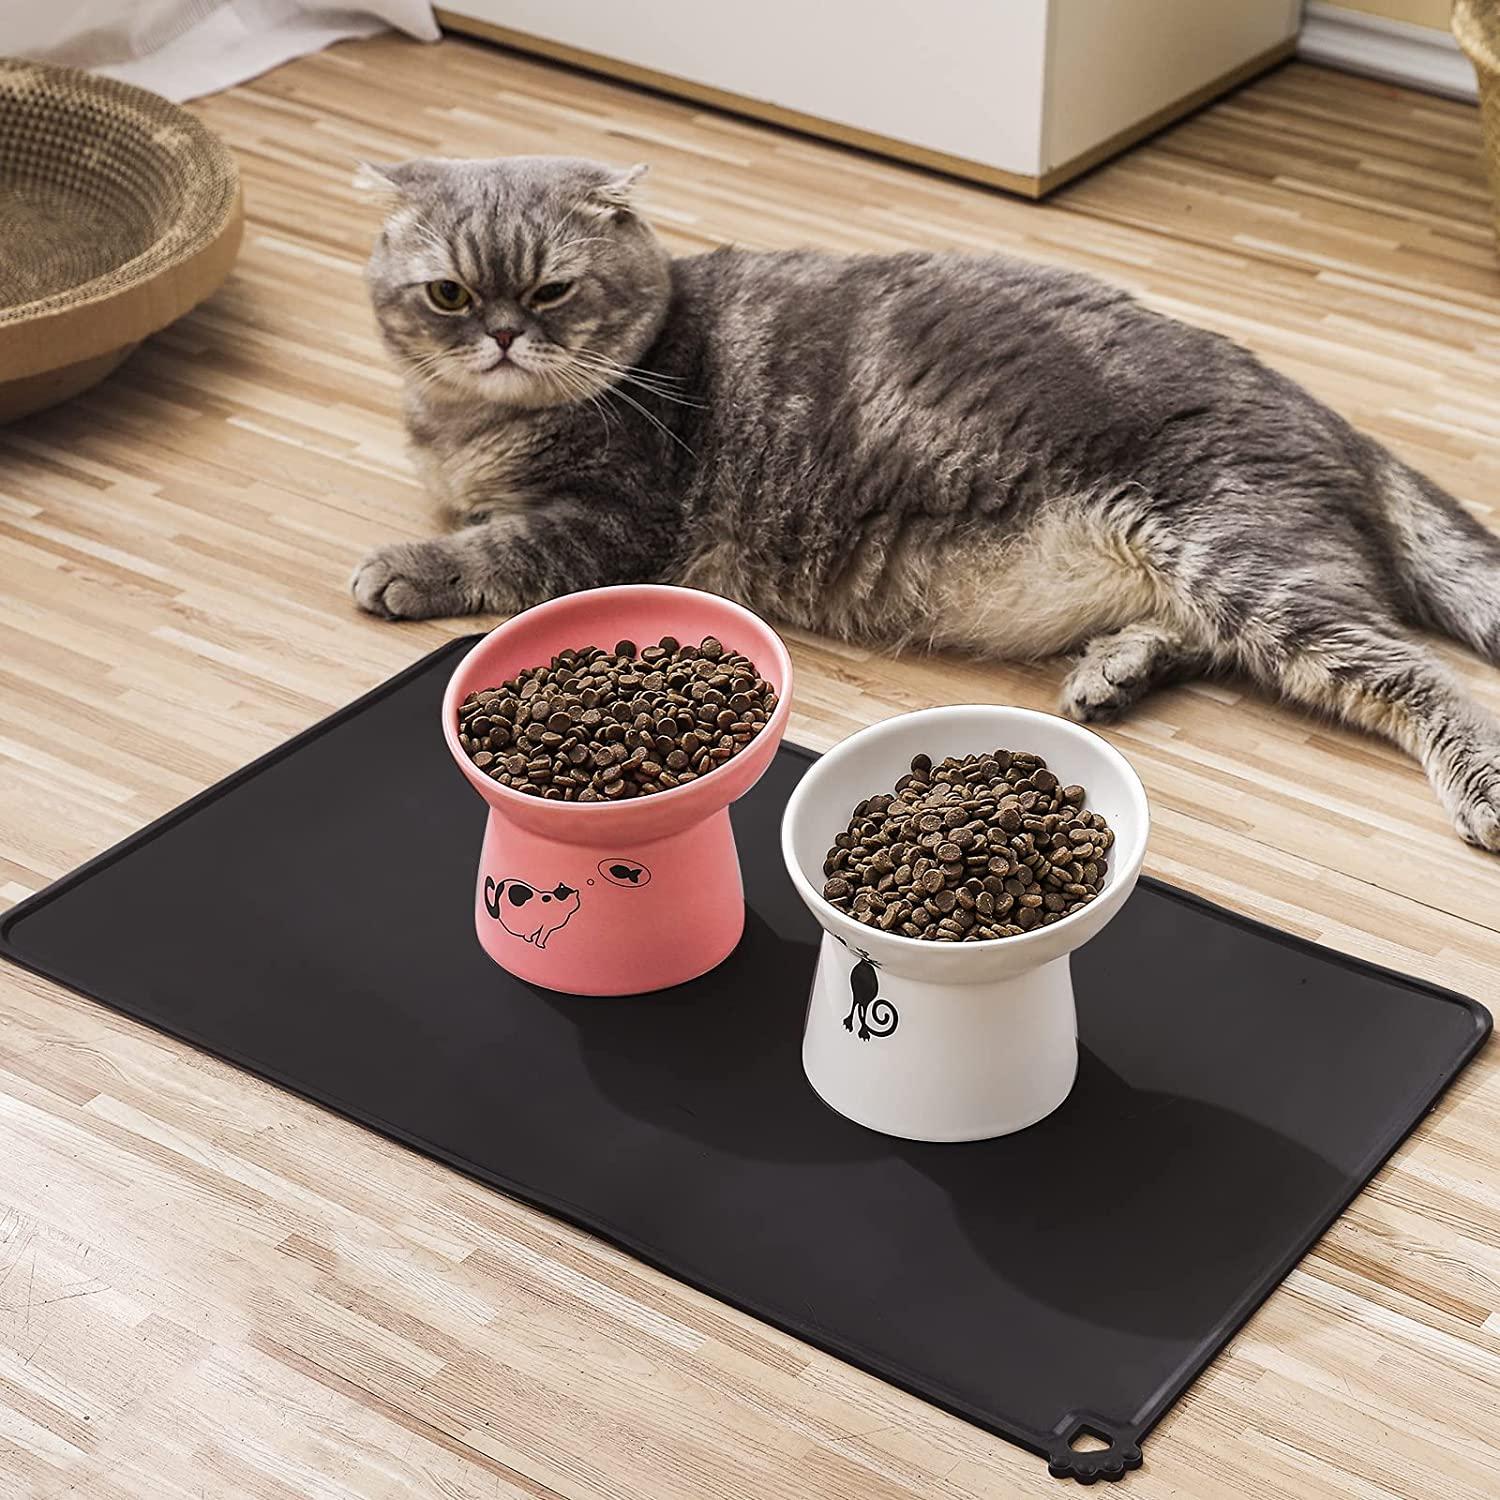 20 x 12 Inch Grey/Black/Blue Silicone Waterproof Pet Feeding Mat, Dog Cat  Bowl Mat for Food and Water,Raised Edges, Anti-Slip Tray Mats